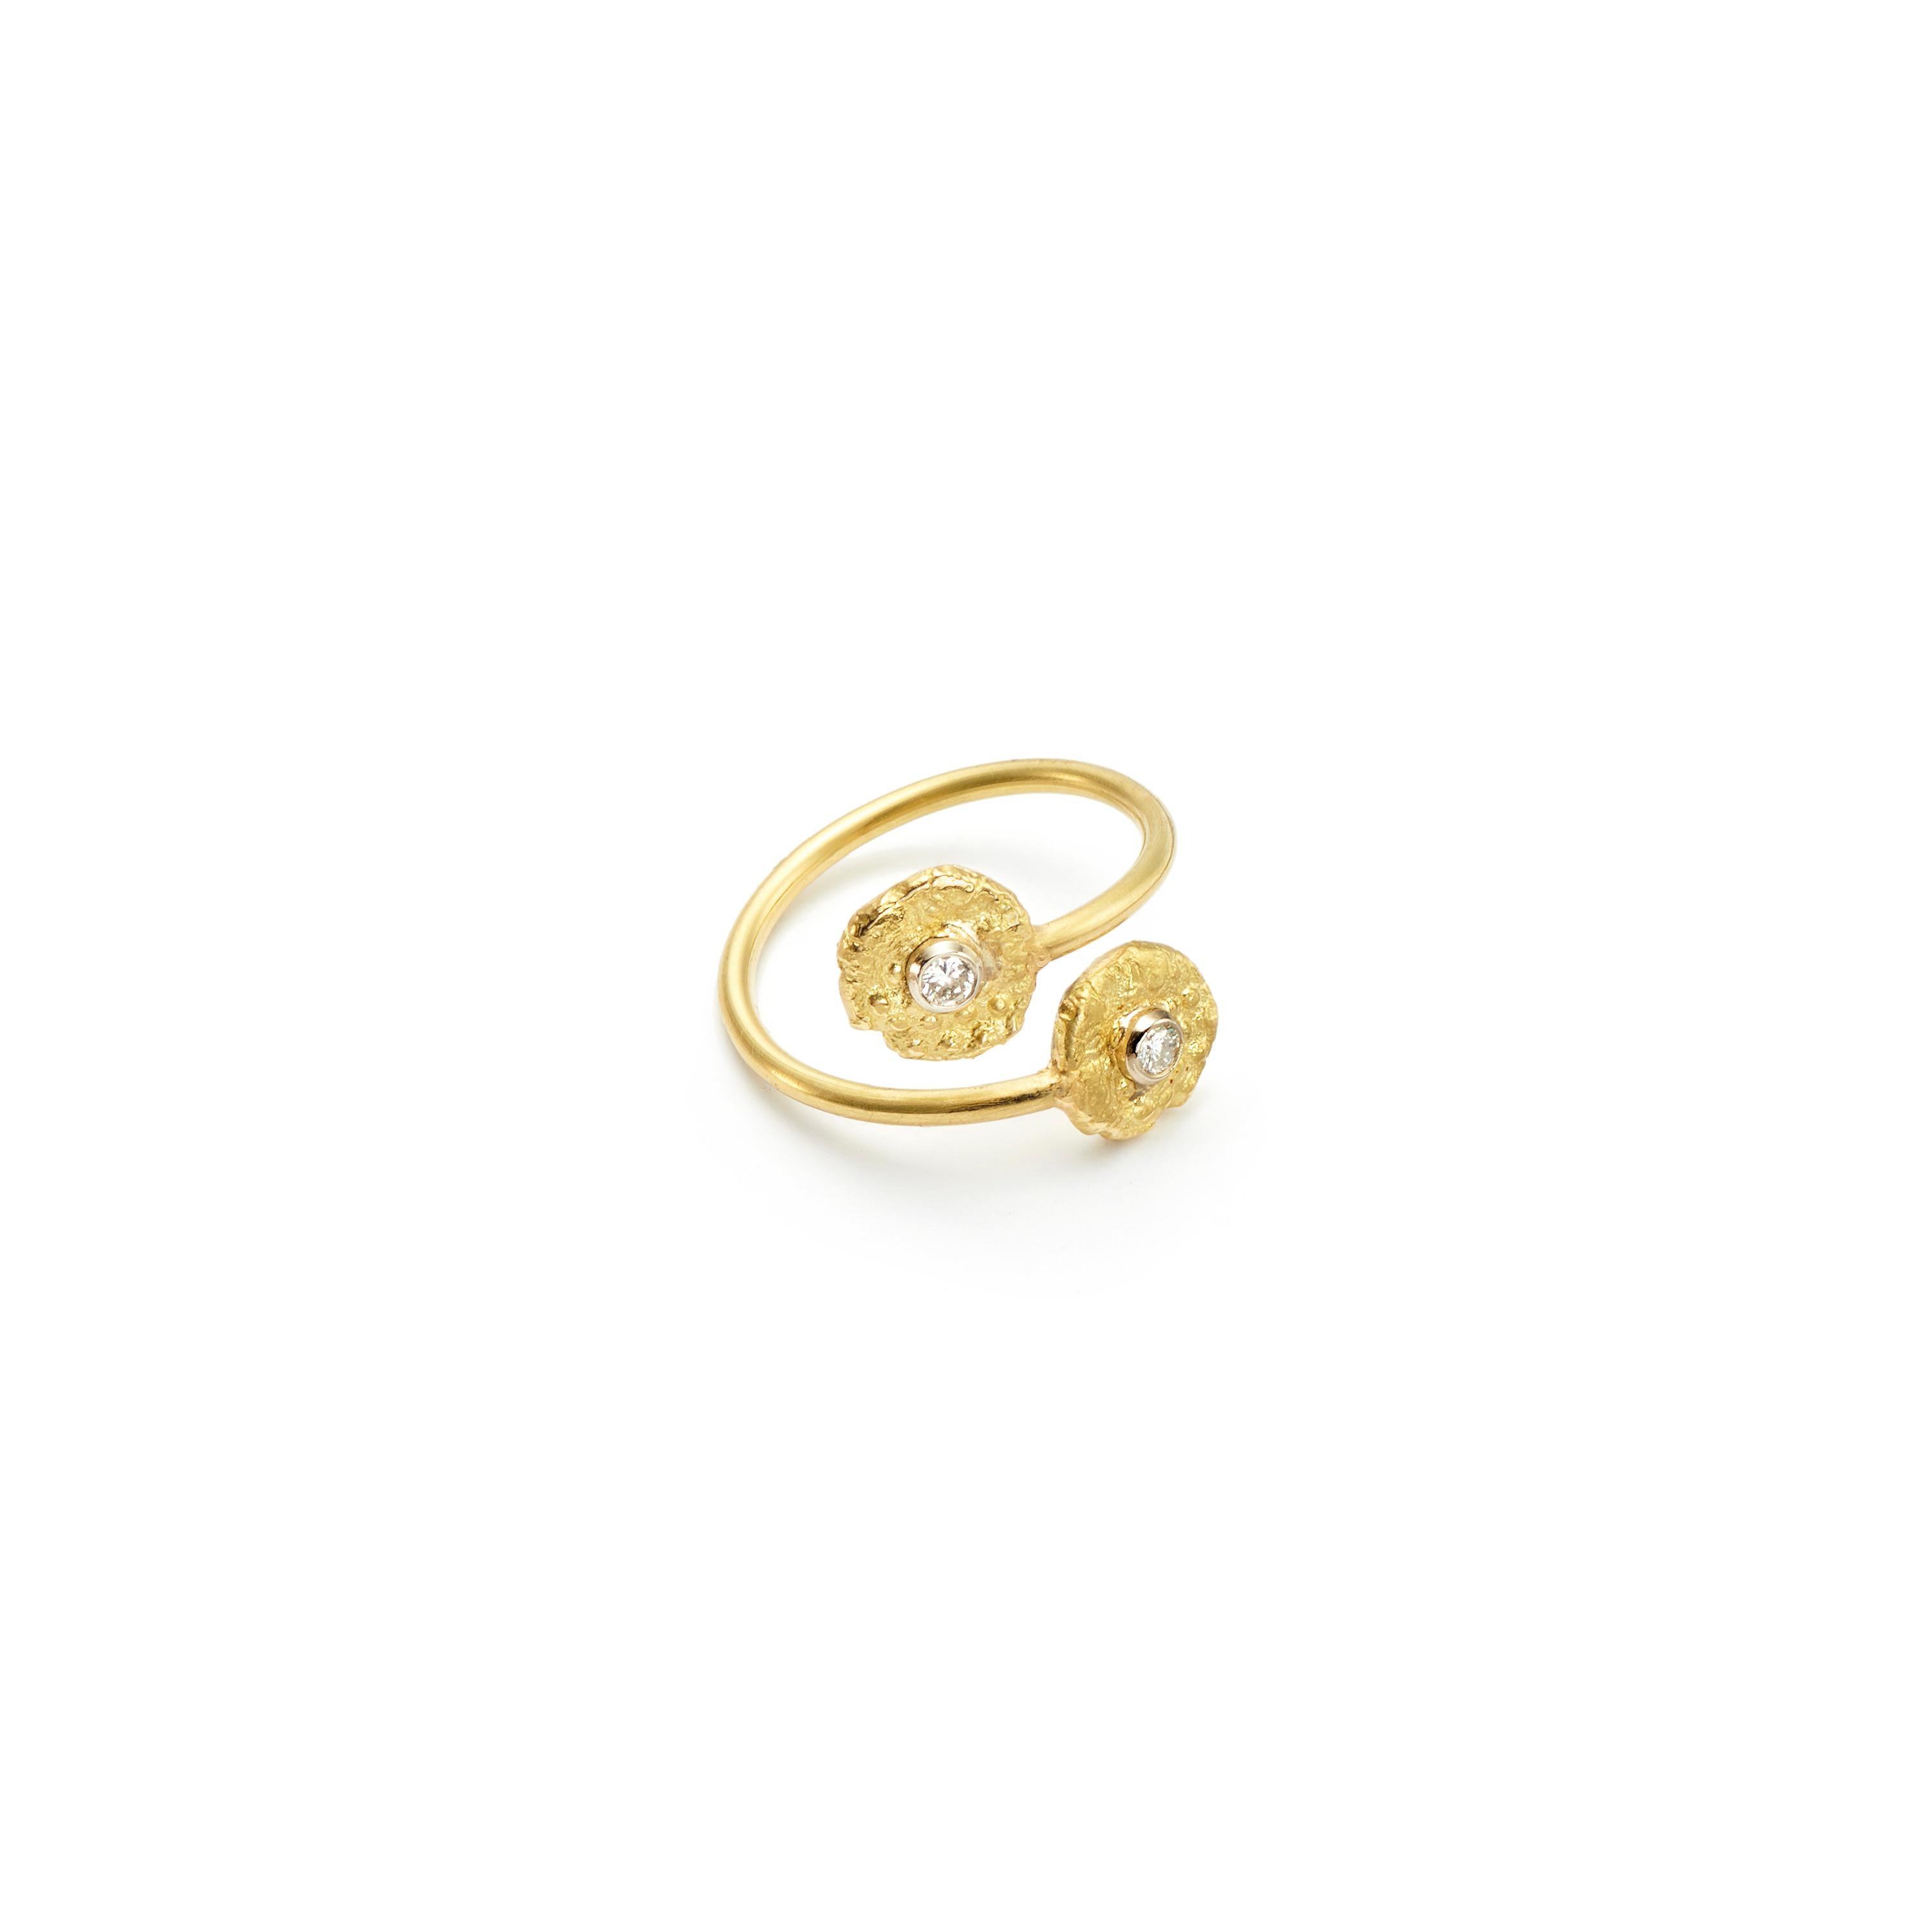 A simply brilliant 18 Karat Gold Bypass ring featuring Susan Lister Locke’s signature “Seaquins” with Diamonds. A lovely gift for yourself or someone special.

Round Brilliant Cut Diamonds: 0.25 Carat